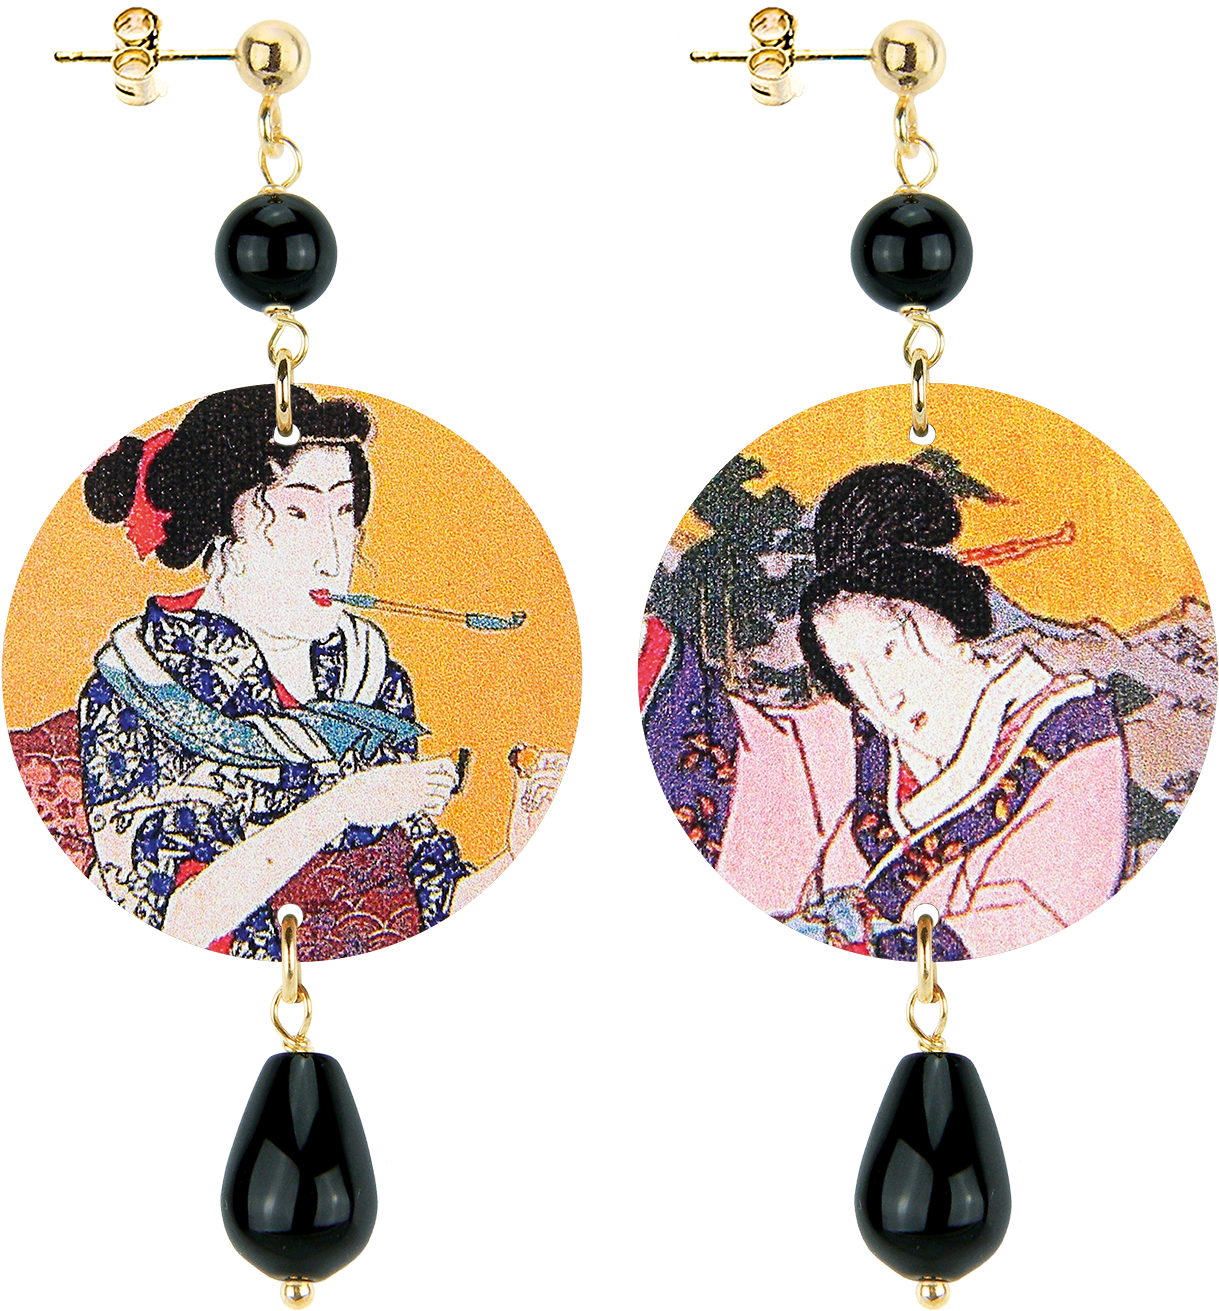 A Pair Of Earrings With A Painting On It